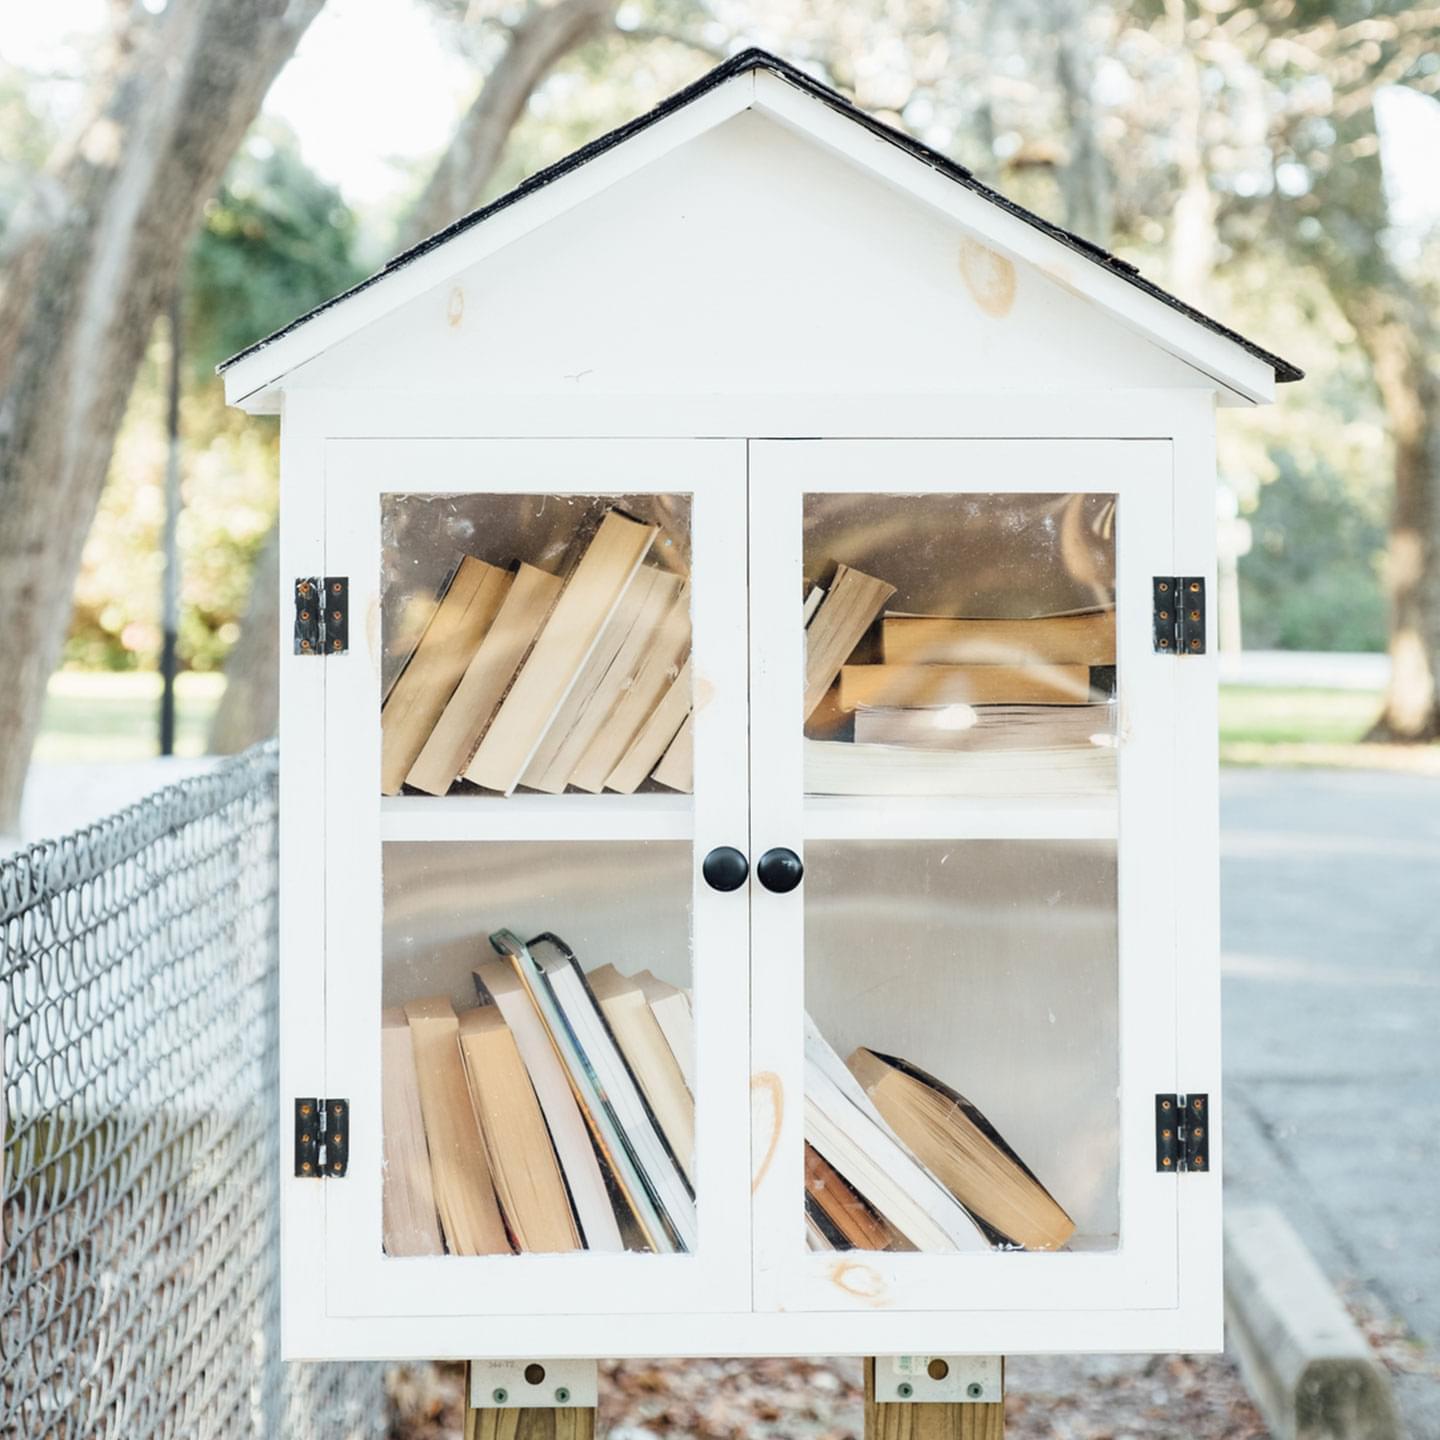 A photograph of a personal library holder housed outside where people can take or donate books for public sharing